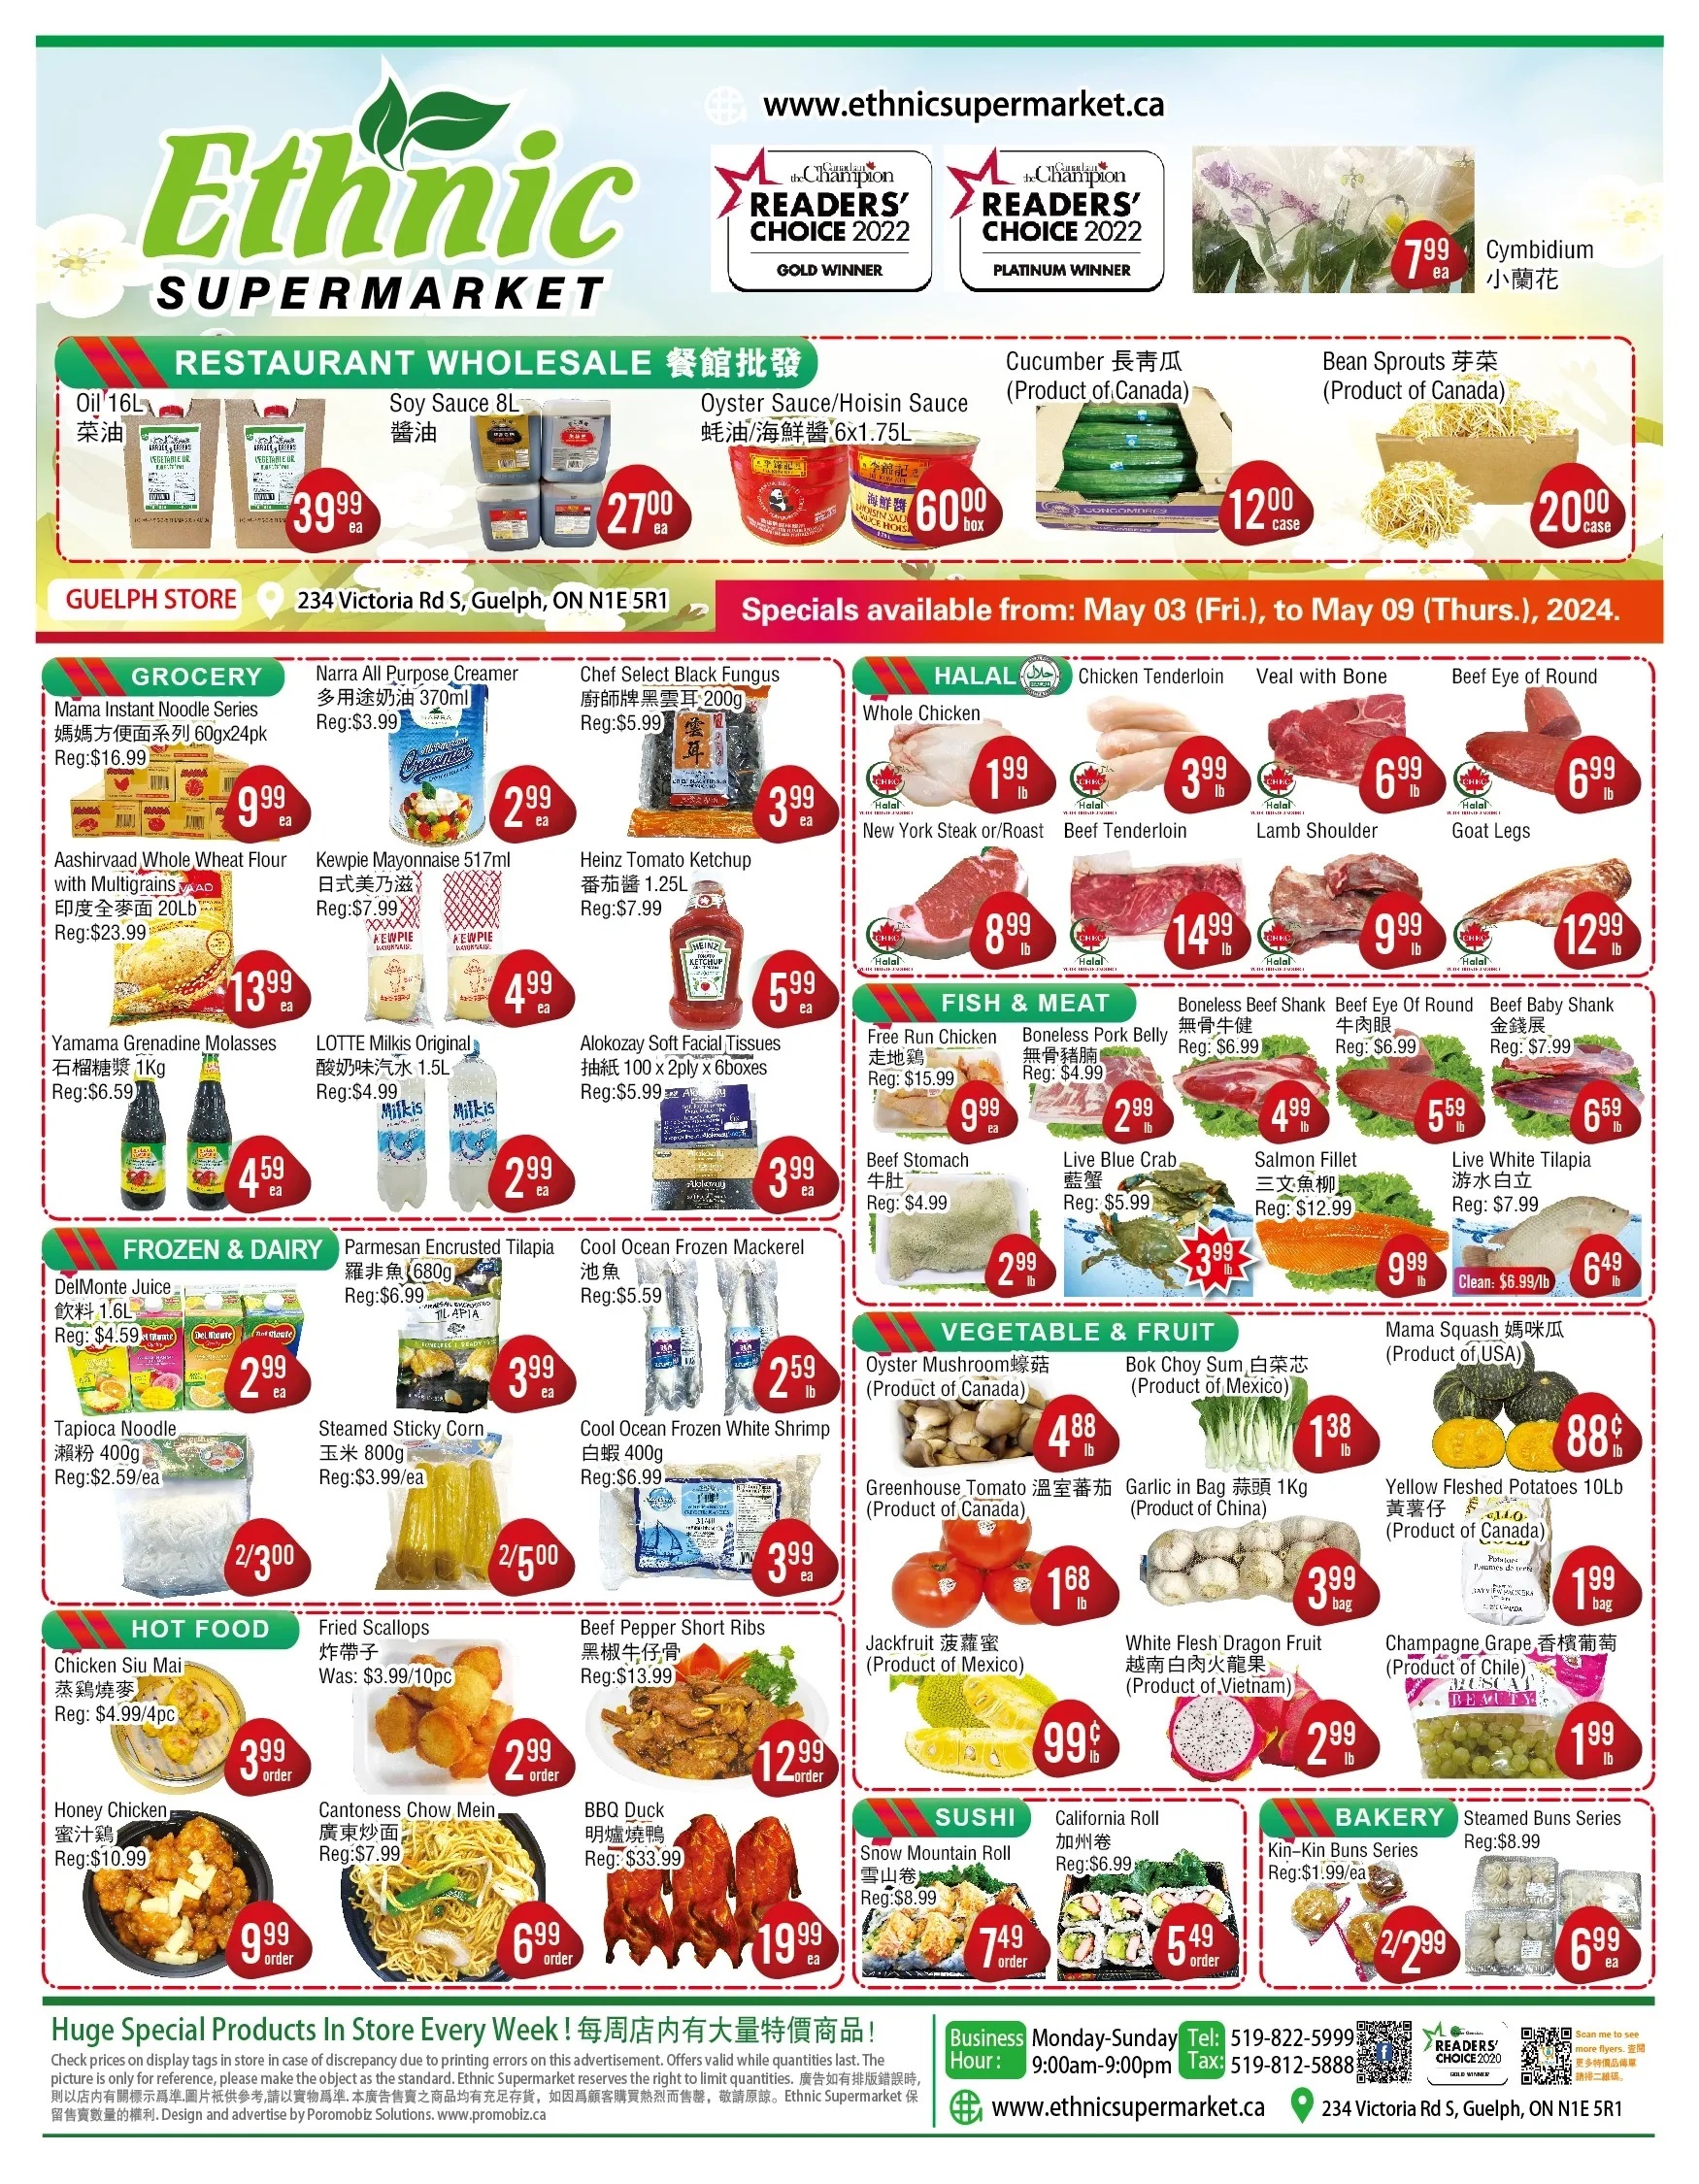 Ethnic Supermarket - Guelph Store - Weekly Flyer Specials